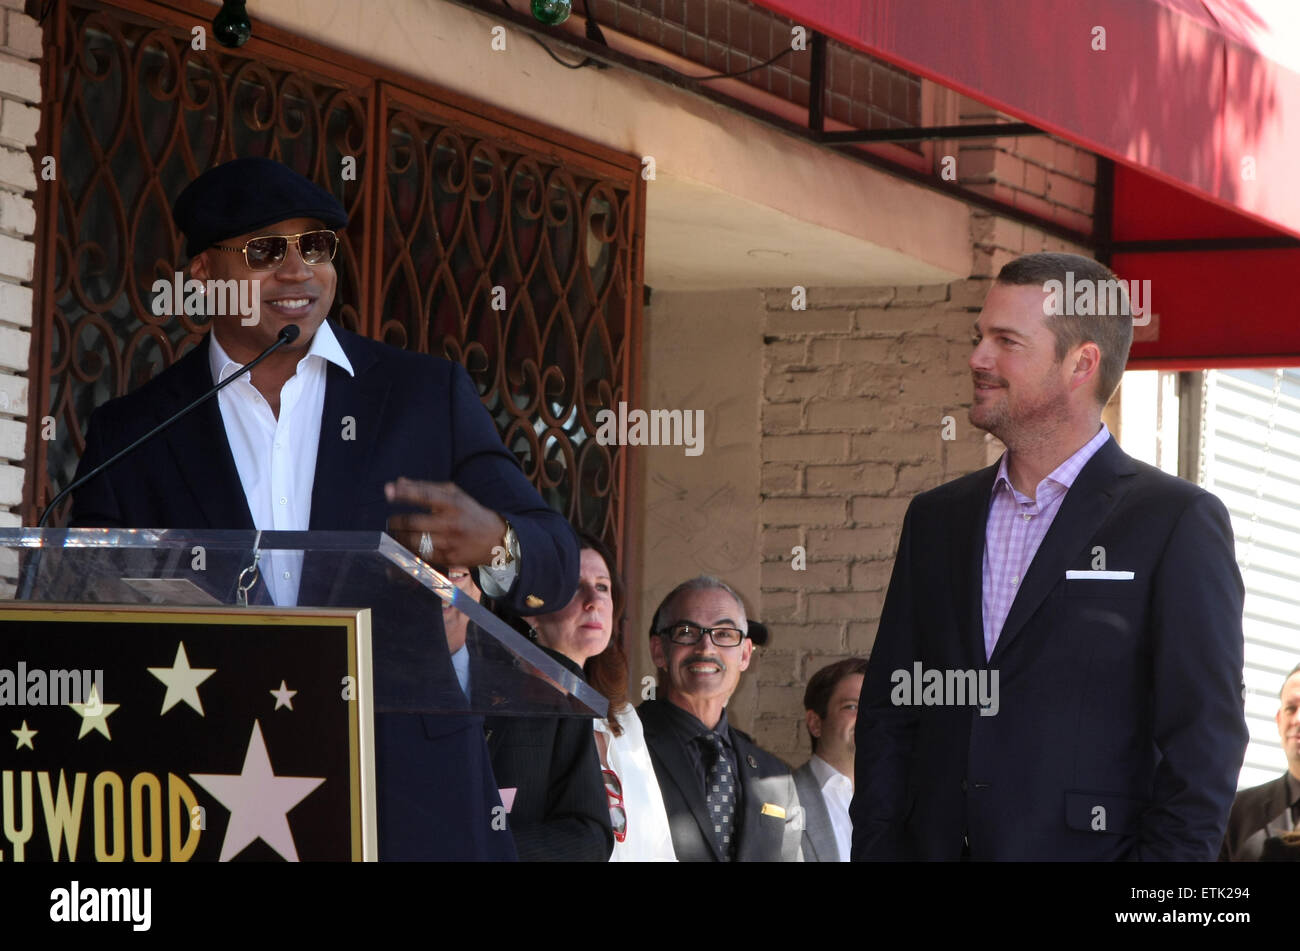 Chris O'Donnell is honored with a star on the Hollywood Walk of Fame  Featuring: Chris O'Donnell, LL Cool J, James Todd Smith Where: Los Angeles, California, United States When: 05 Mar 2015 Credit: Nicky Nelson/WENN.com Stock Photo